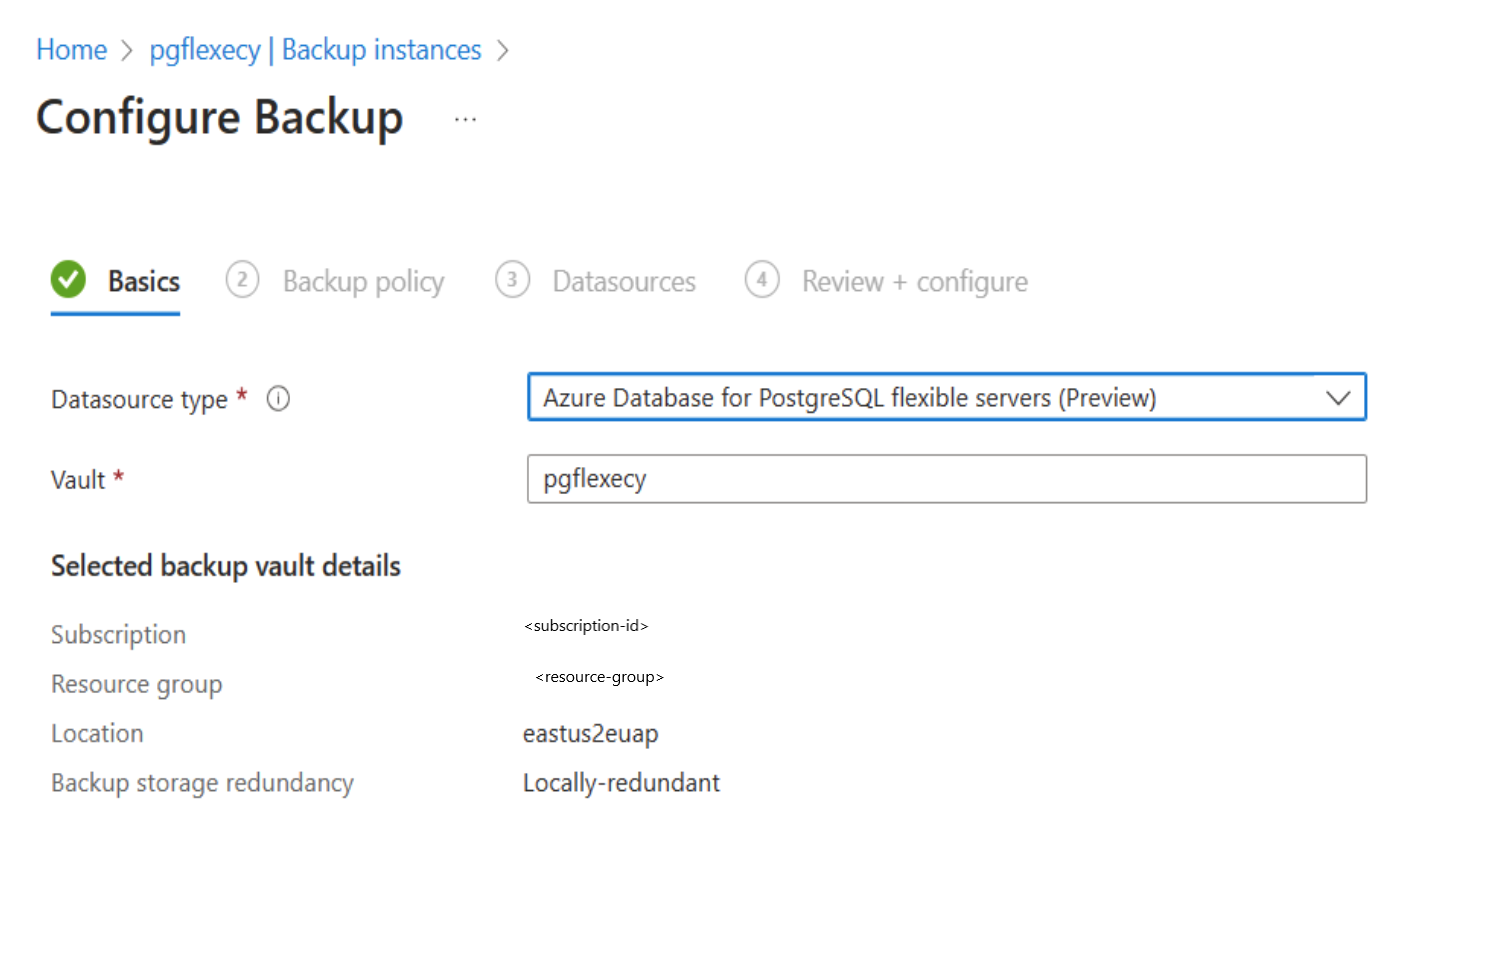 Screenshot showing the option to add a backup policy.